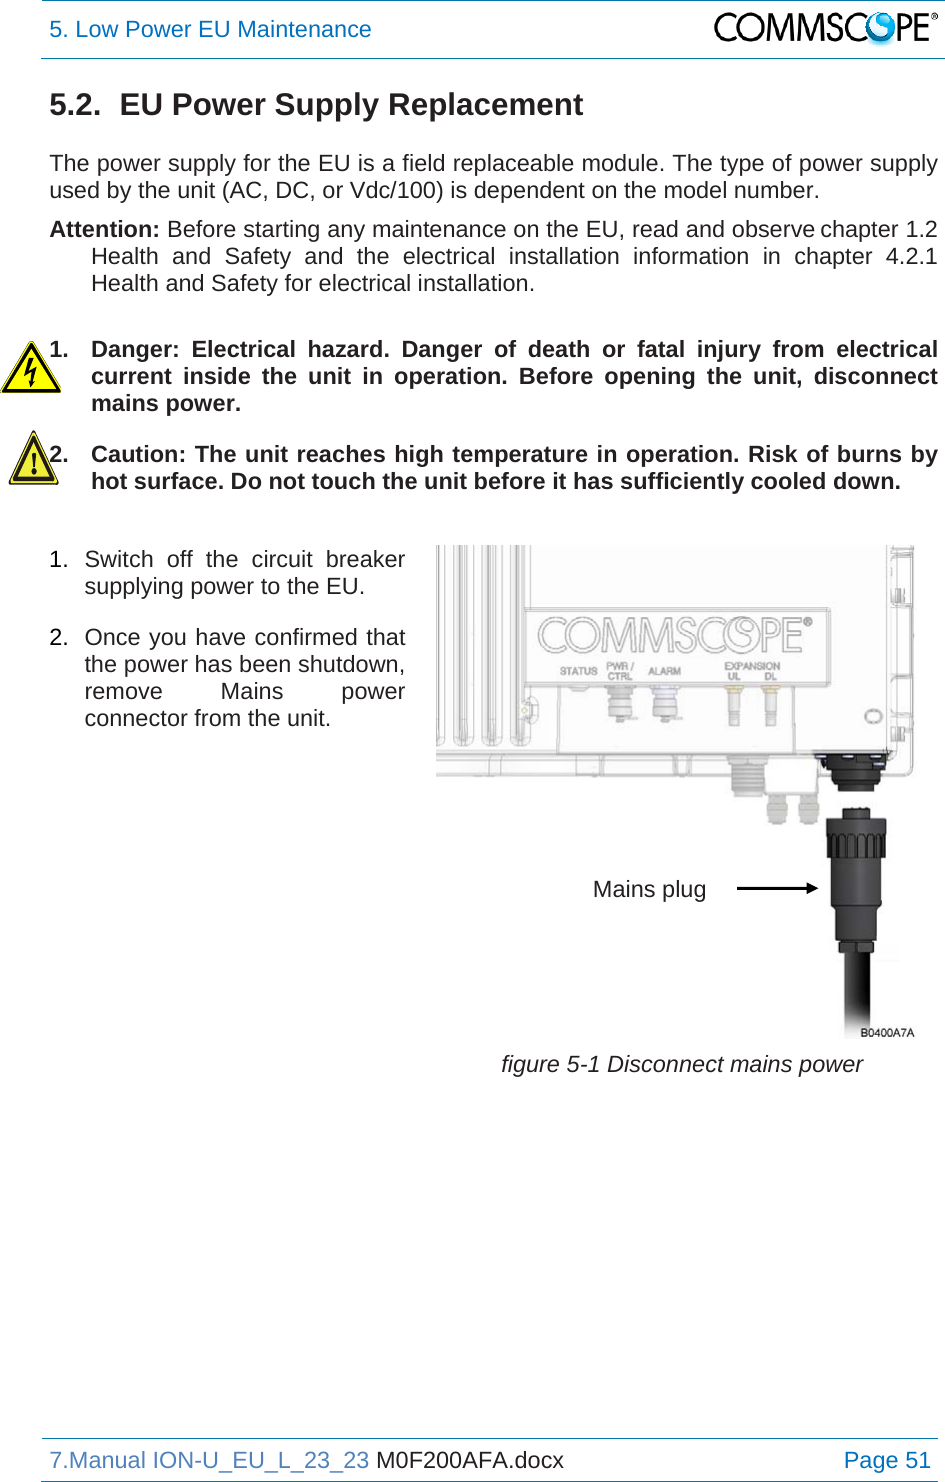 5. Low Power EU Maintenance  7.Manual ION-U_EU_L_23_23 M0F200AFA.docx Page 51 5.2.  EU Power Supply Replacement  The power supply for the EU is a field replaceable module. The type of power supply used by the unit (AC, DC, or Vdc/100) is dependent on the model number. Attention: Before starting any maintenance on the EU, read and observe chapter 1.2 Health and Safety and the electrical installation information in chapter 4.2.1 Health and Safety for electrical installation.  1.  Danger: Electrical hazard. Danger of death or fatal injury from electrical current inside the unit in operation. Before opening the unit, disconnect mains power. 2.  Caution: The unit reaches high temperature in operation. Risk of burns by hot surface. Do not touch the unit before it has sufficiently cooled down. 1.  Switch off the circuit breaker supplying power to the EU. 2.  Once you have confirmed that the power has been shutdown, remove Mains power connector from the unit. figure 5-1 Disconnect mains power Mains plug 